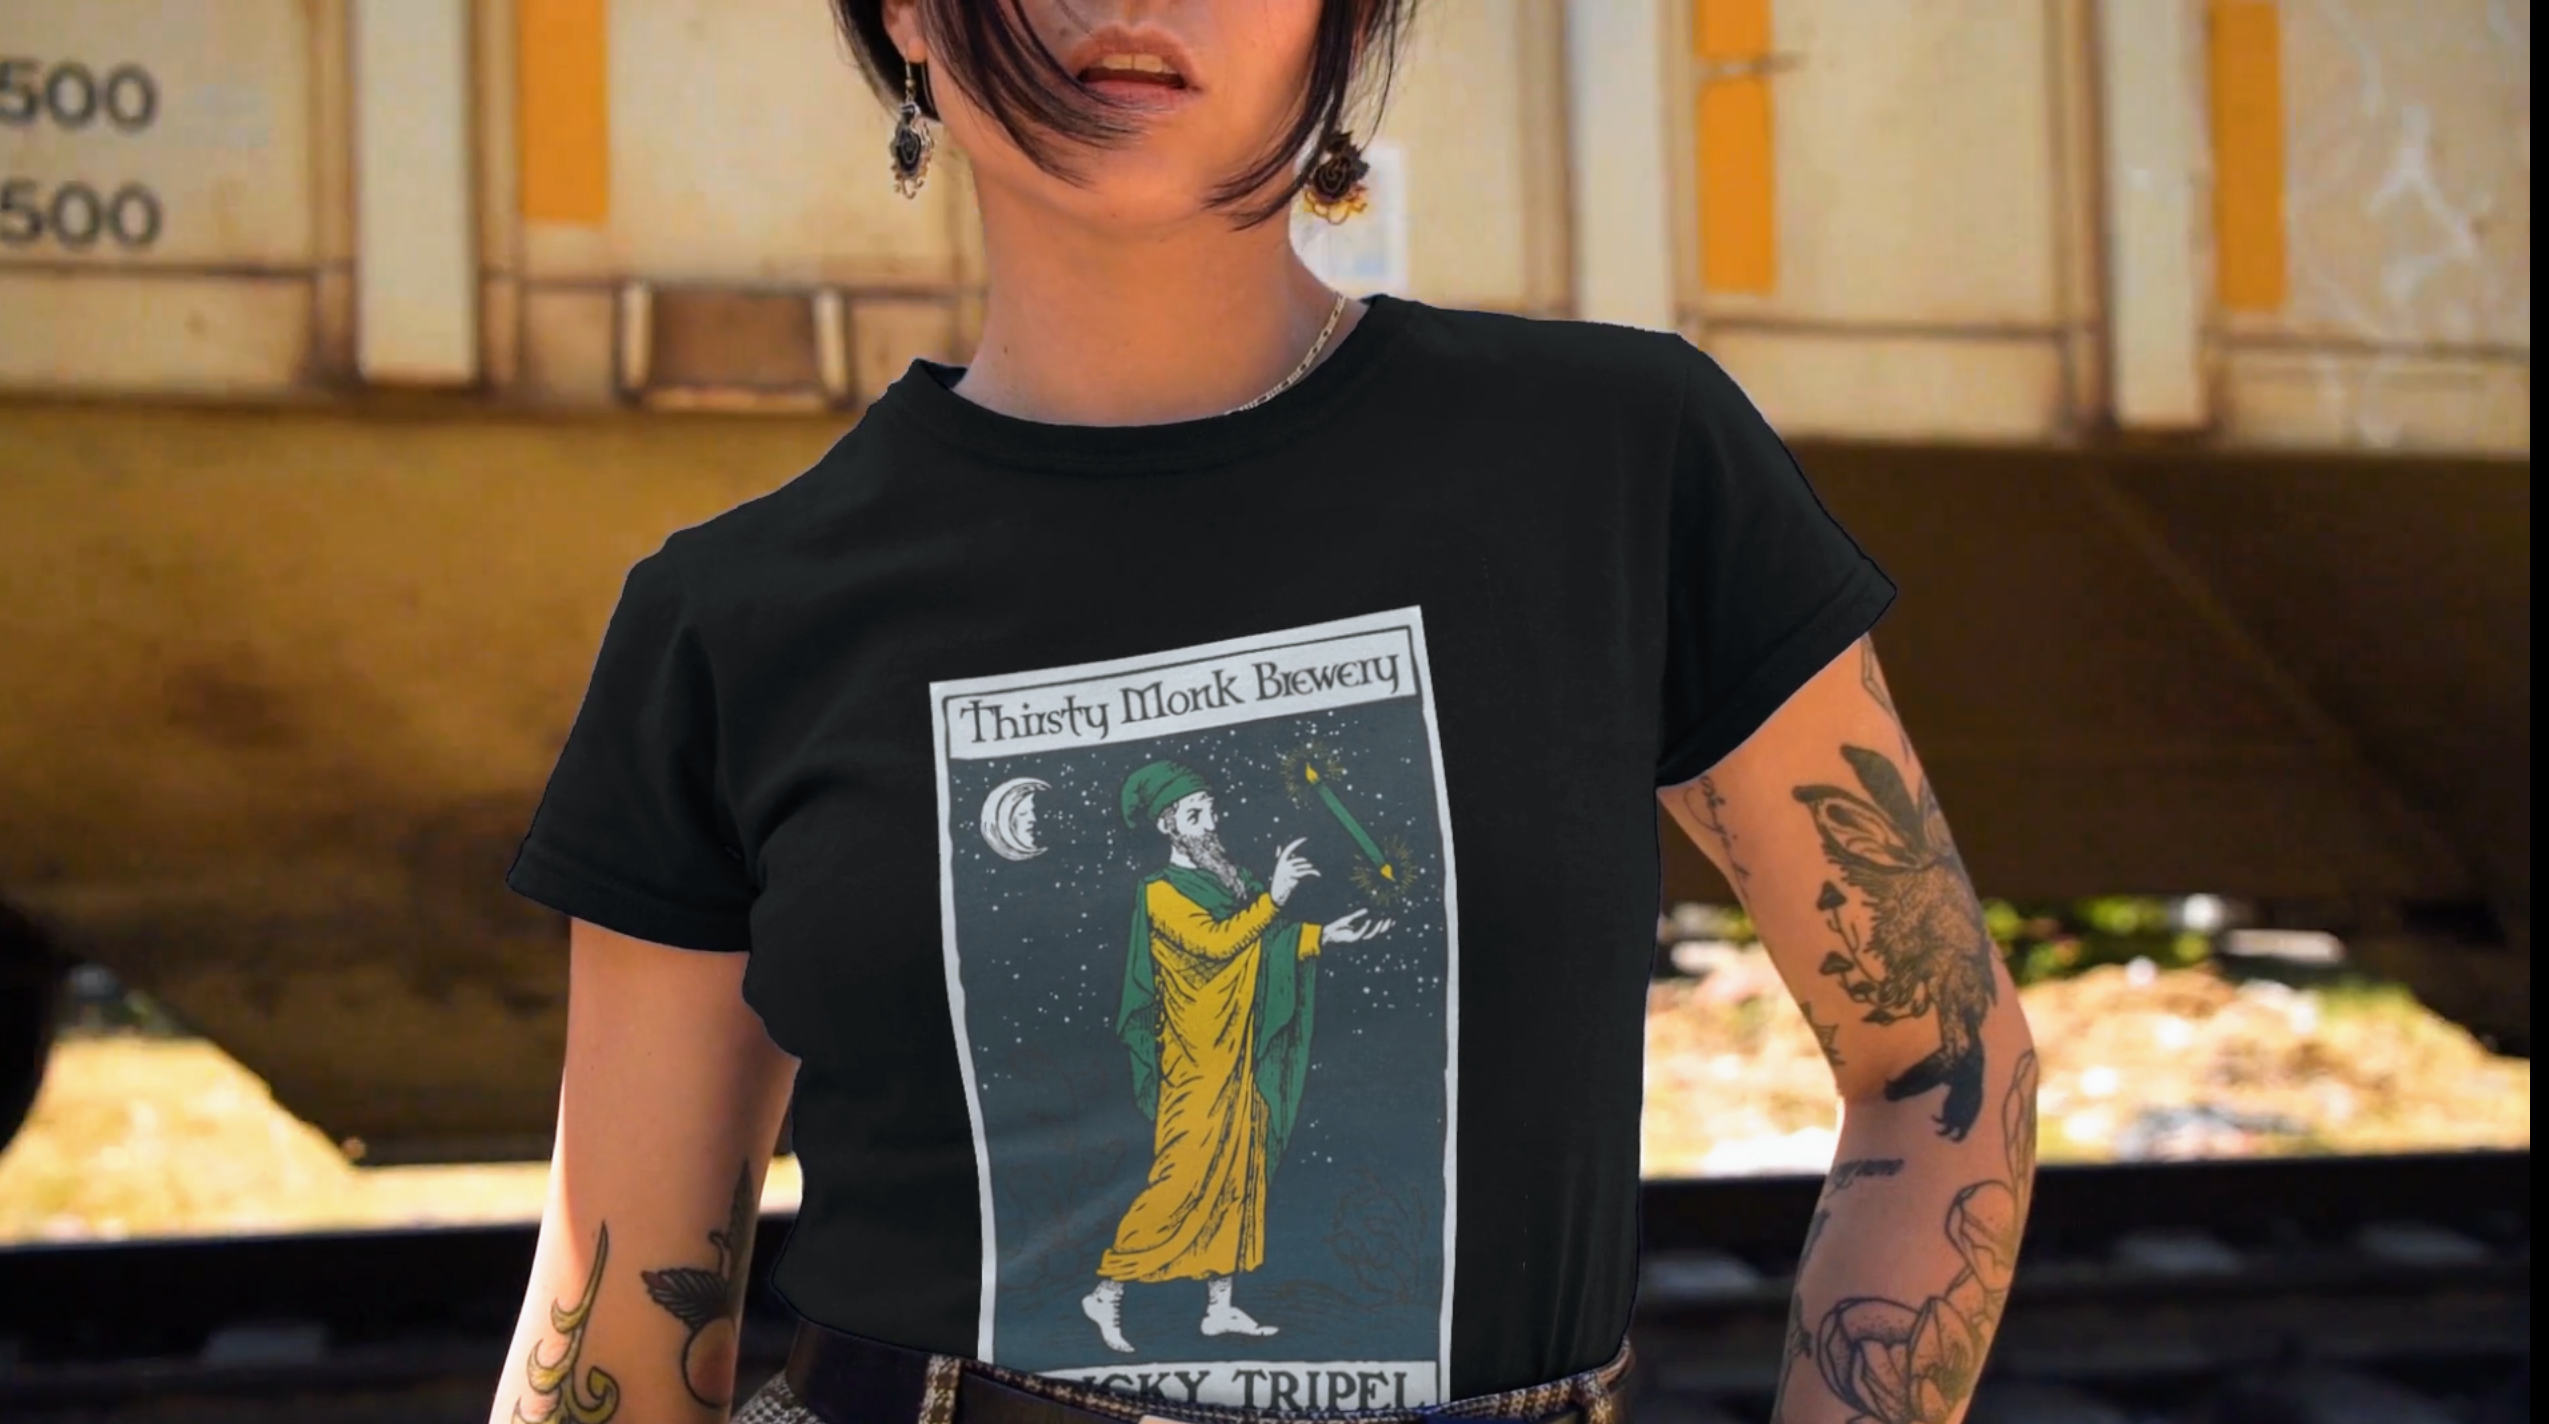 Load video: Thirsty Monk Brewery Tricky Tripel Tee